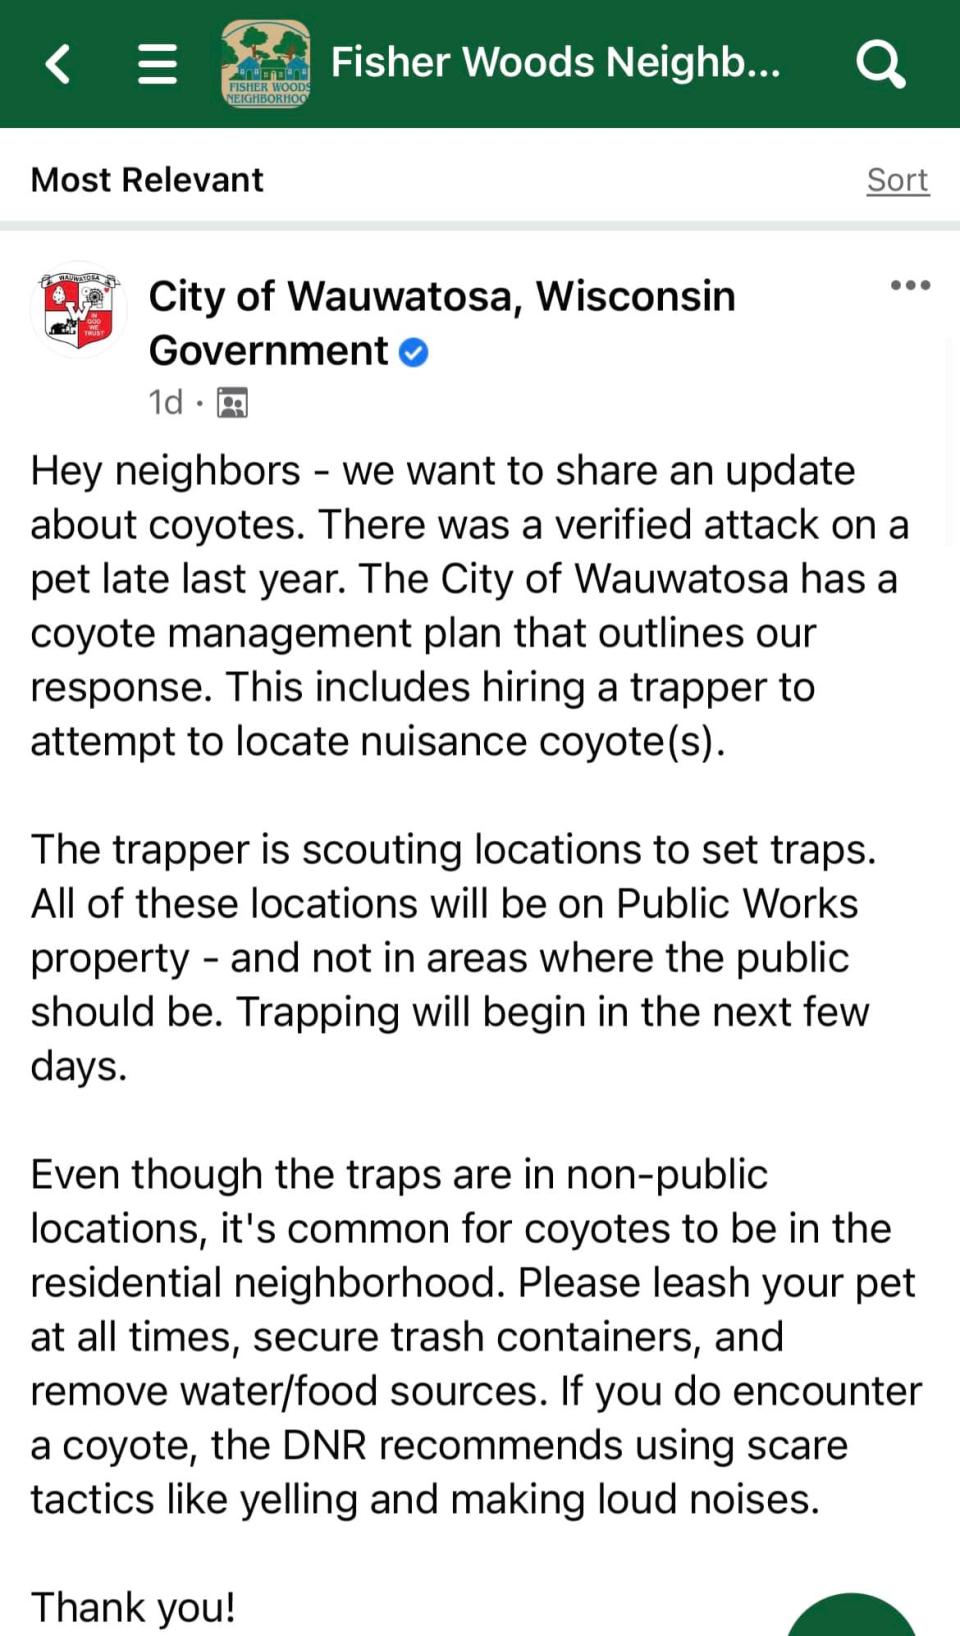 Wauwatosa posted in the Fisher Woods Neighborhood Association's Facebook group this month to let residents know that a trapper will be placing traps on Public Works property in response to a verified coyote attack. The coyote attack happened in October 2022, a Wauwatosa police report said.